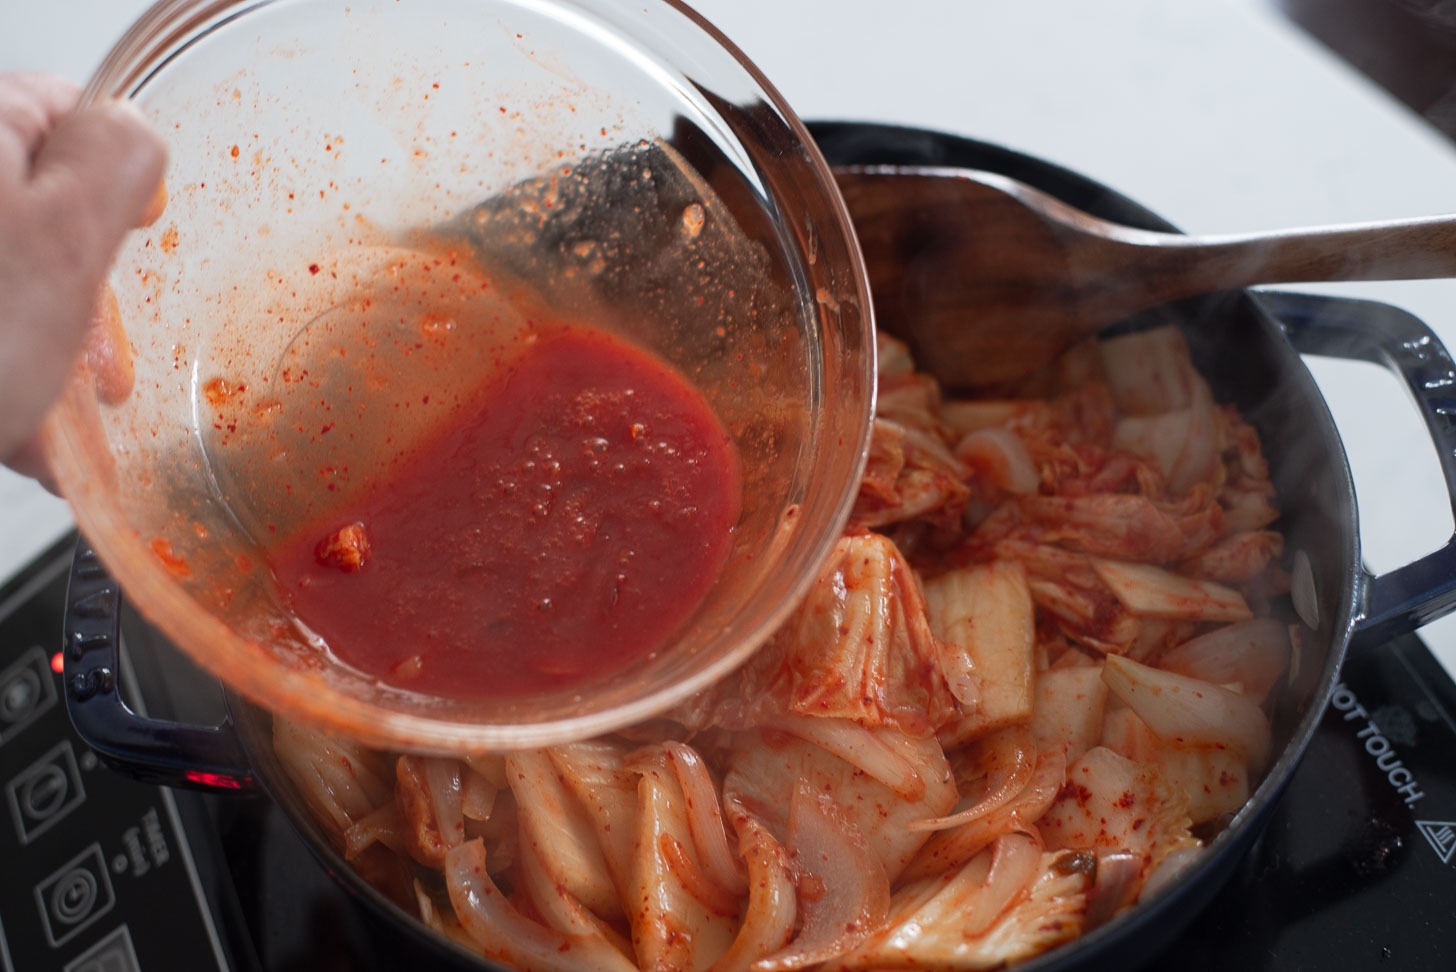 Kimchi juice added to kimchi and onion mixture in the pot.